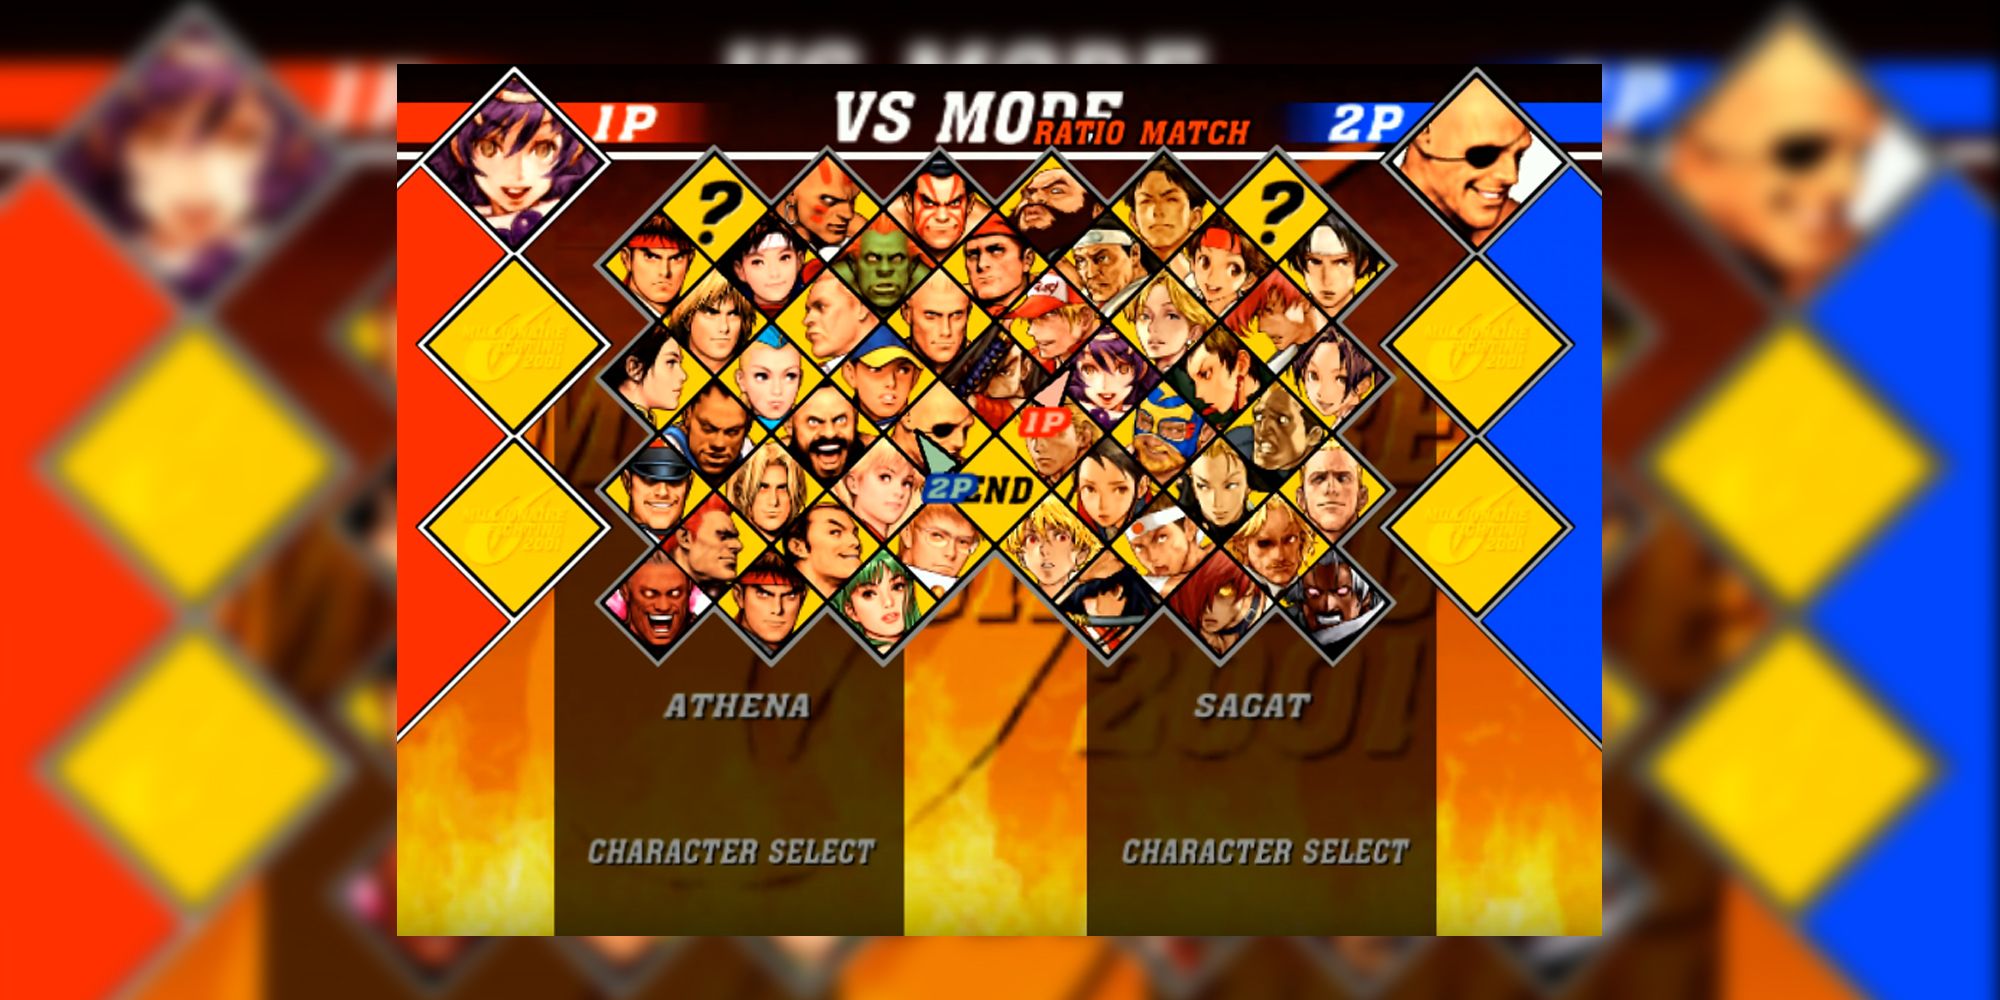 The Character Select Screen for Capcom vs. SNK 2: Mark of the Millenium 2001